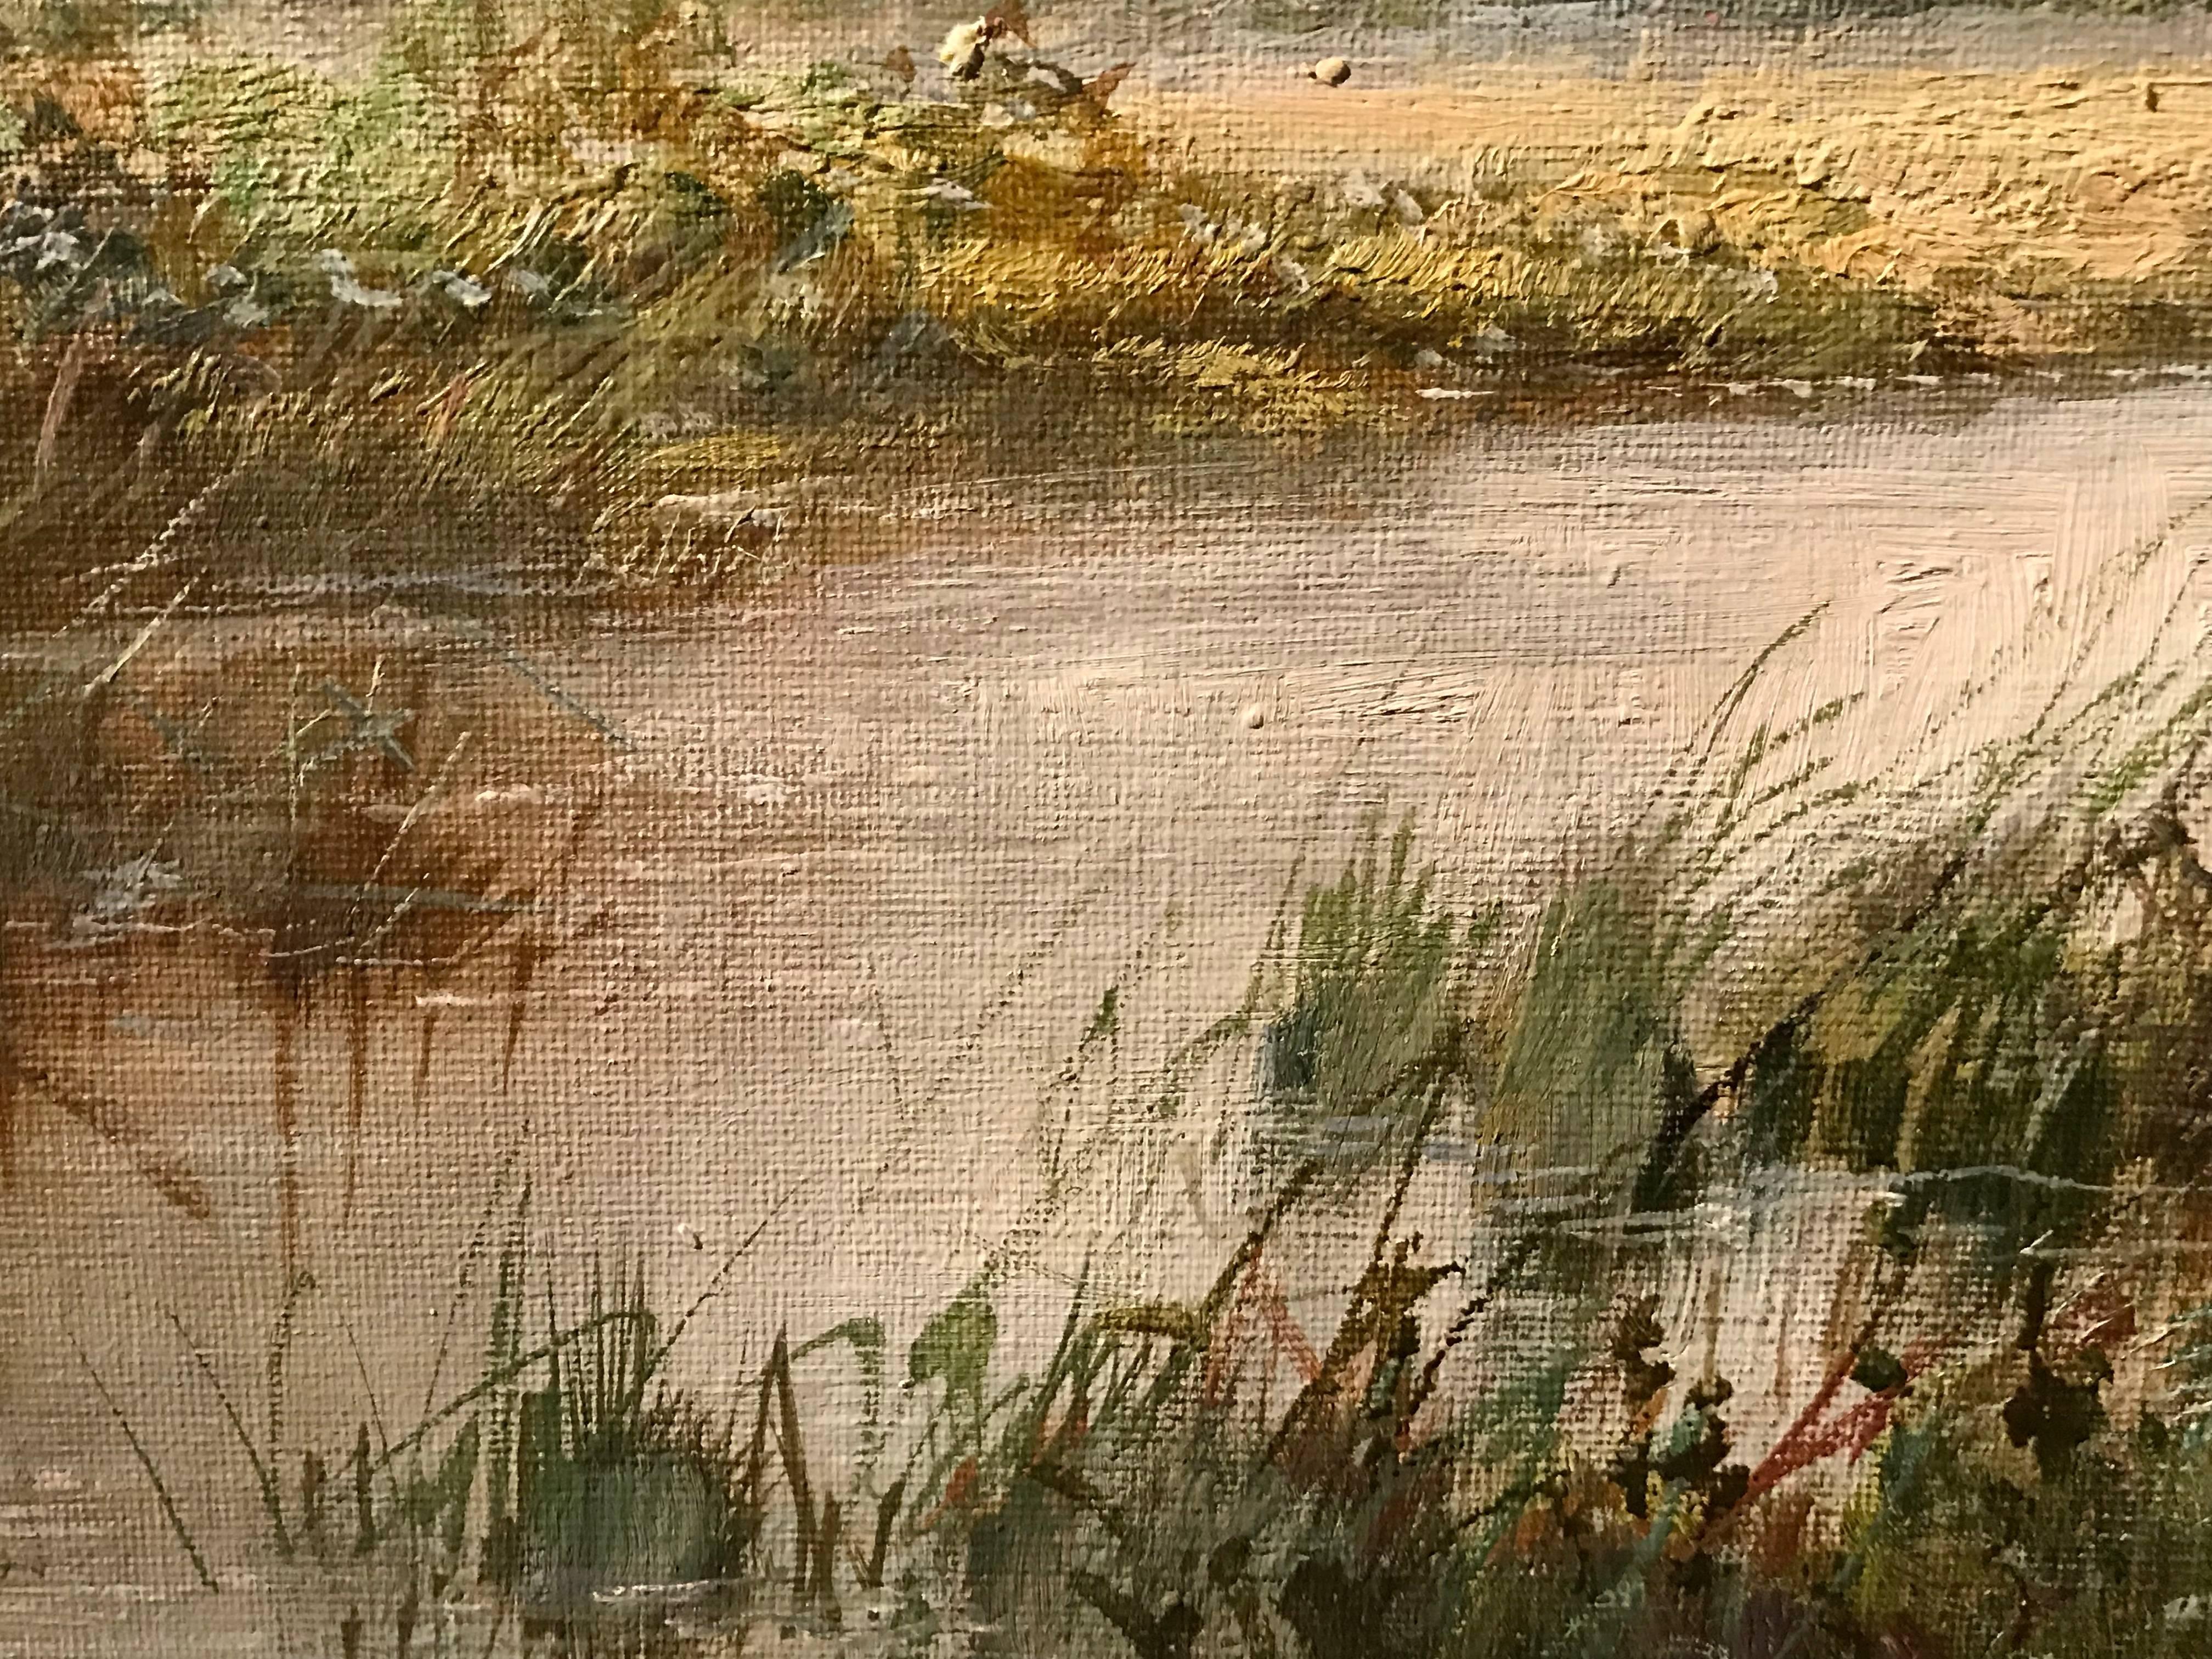 River Landscape
by Daniel Sherrin (1868-1940) 
signed with pseudonym, L. Richards
oil painting on canvas, framed

canvas: 16 x 24 inches 
framed: 21 x 29 inches

Very fine antique English oil painting on canvas by the well listed and popular British